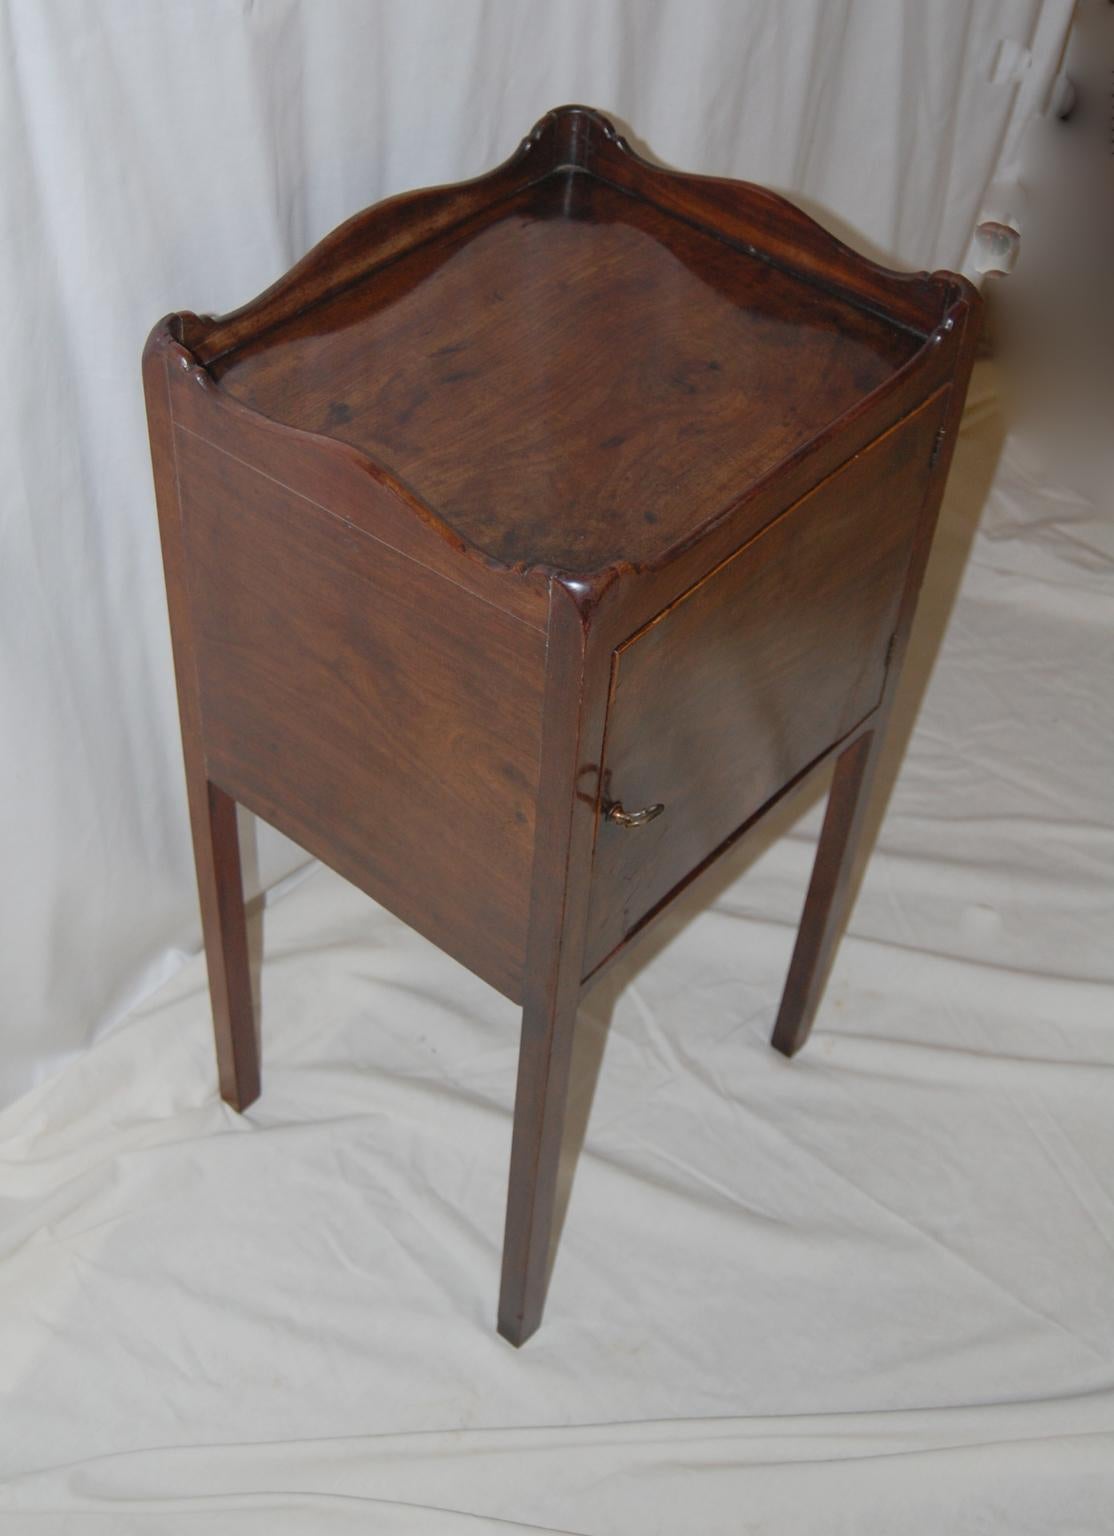 18th Century English Georgian Mahogany Tapered Leg Pot Cupboard with Galleried Top